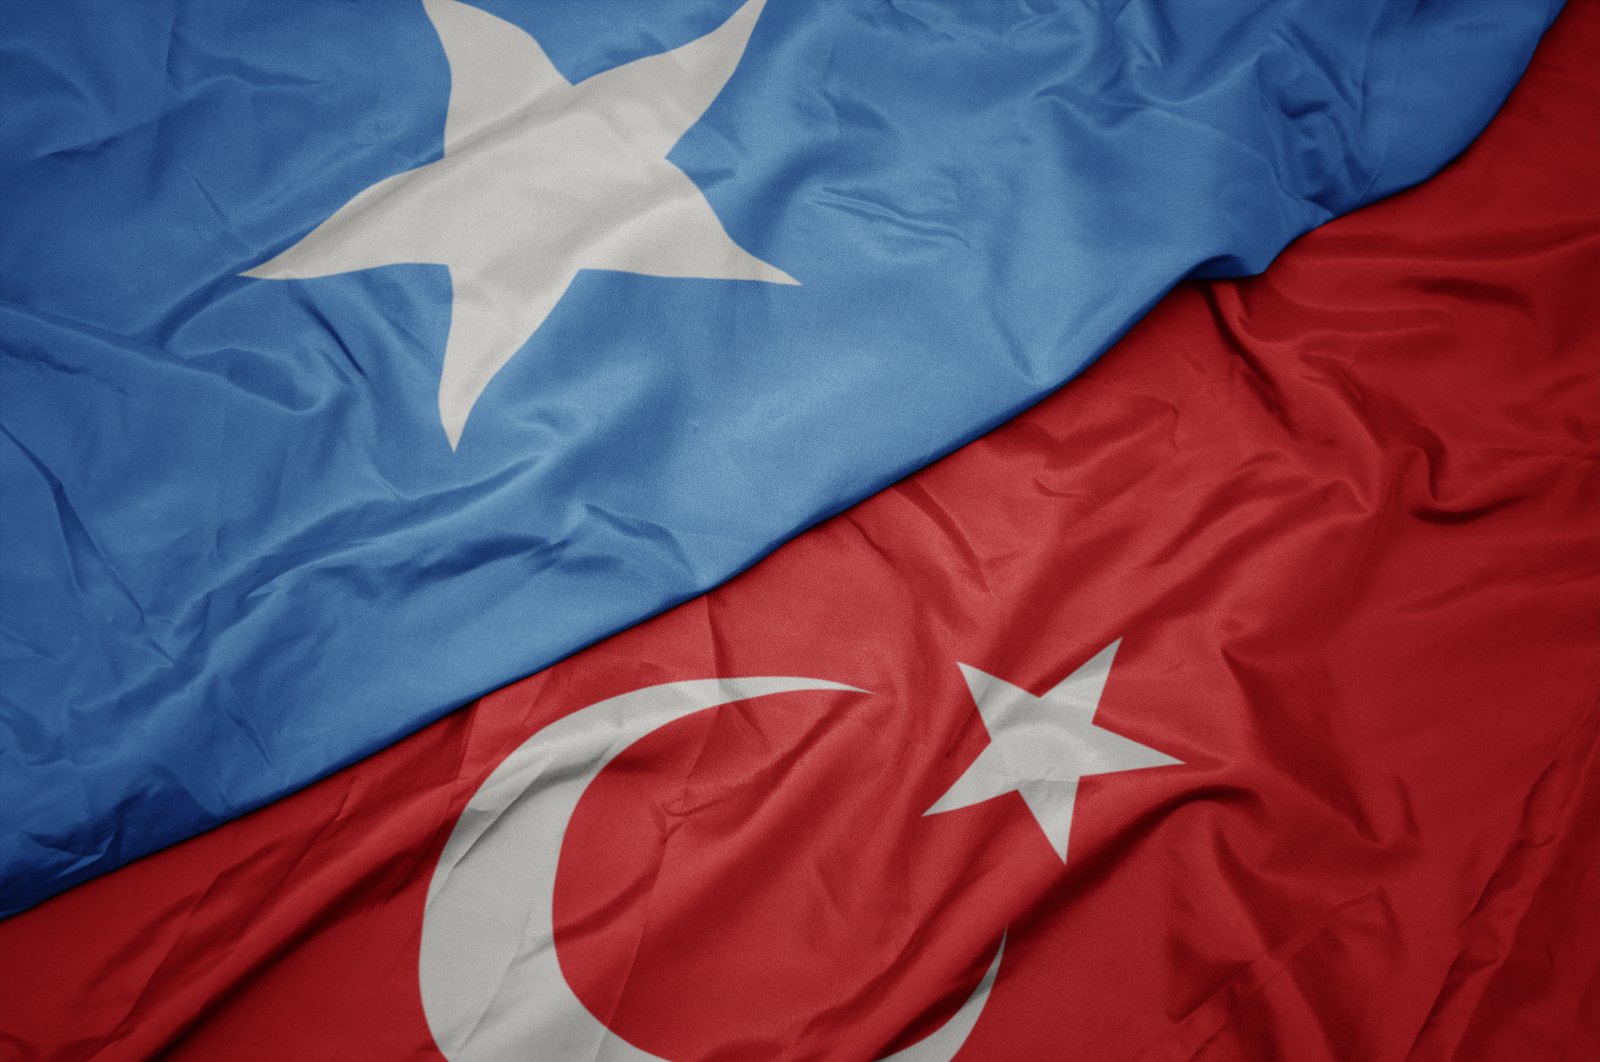 Turkish and Somalian flags are together in this undated file photo. (Shutterstock Photo)